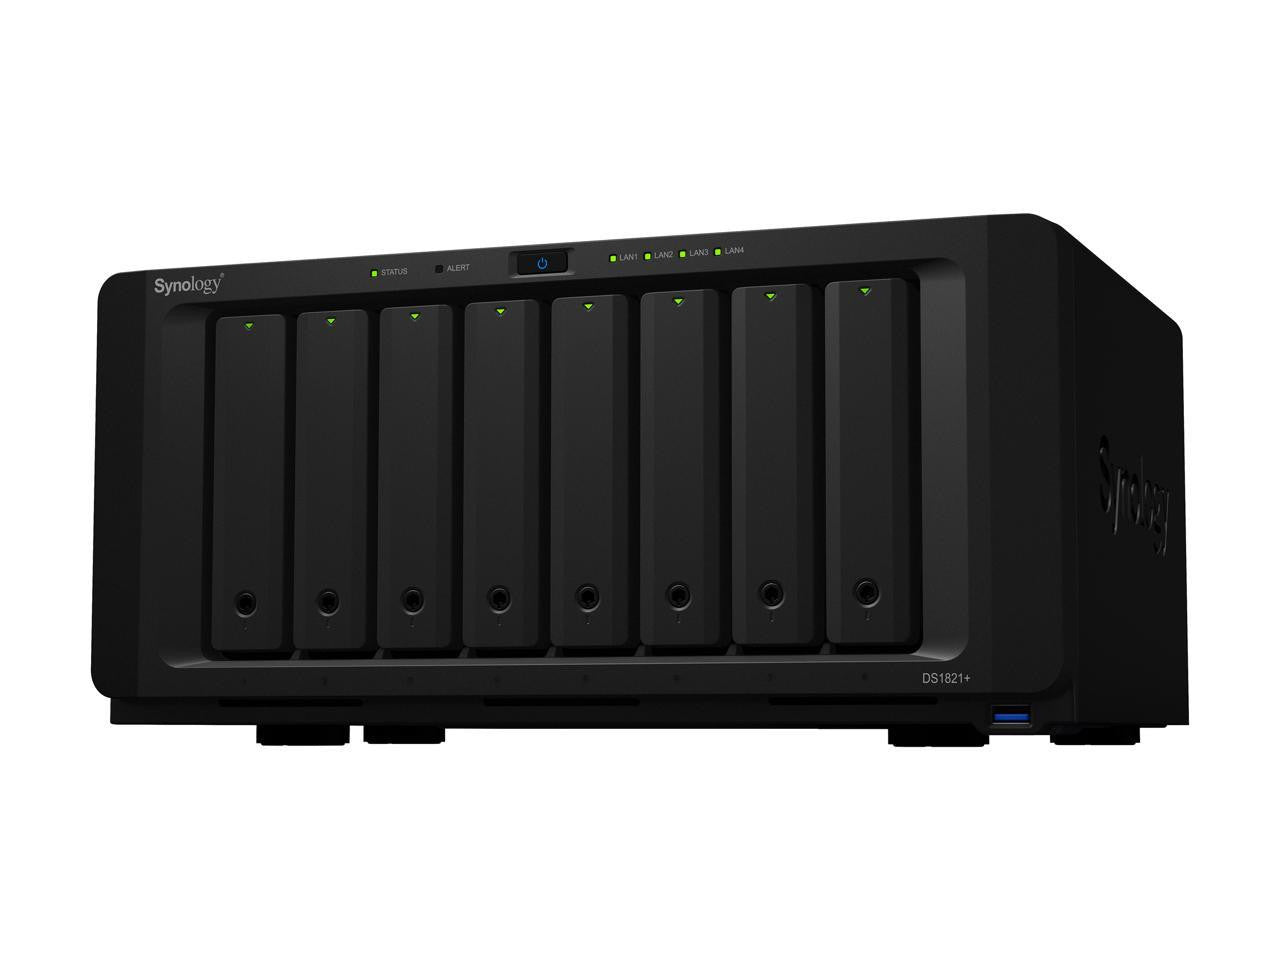 Synology DS1821+ 8-BAY DiskStation with 16GB Synology RAM and 24TB (8x3TB) Western Digital RED PLUS Drives Fully Assembled and Tested